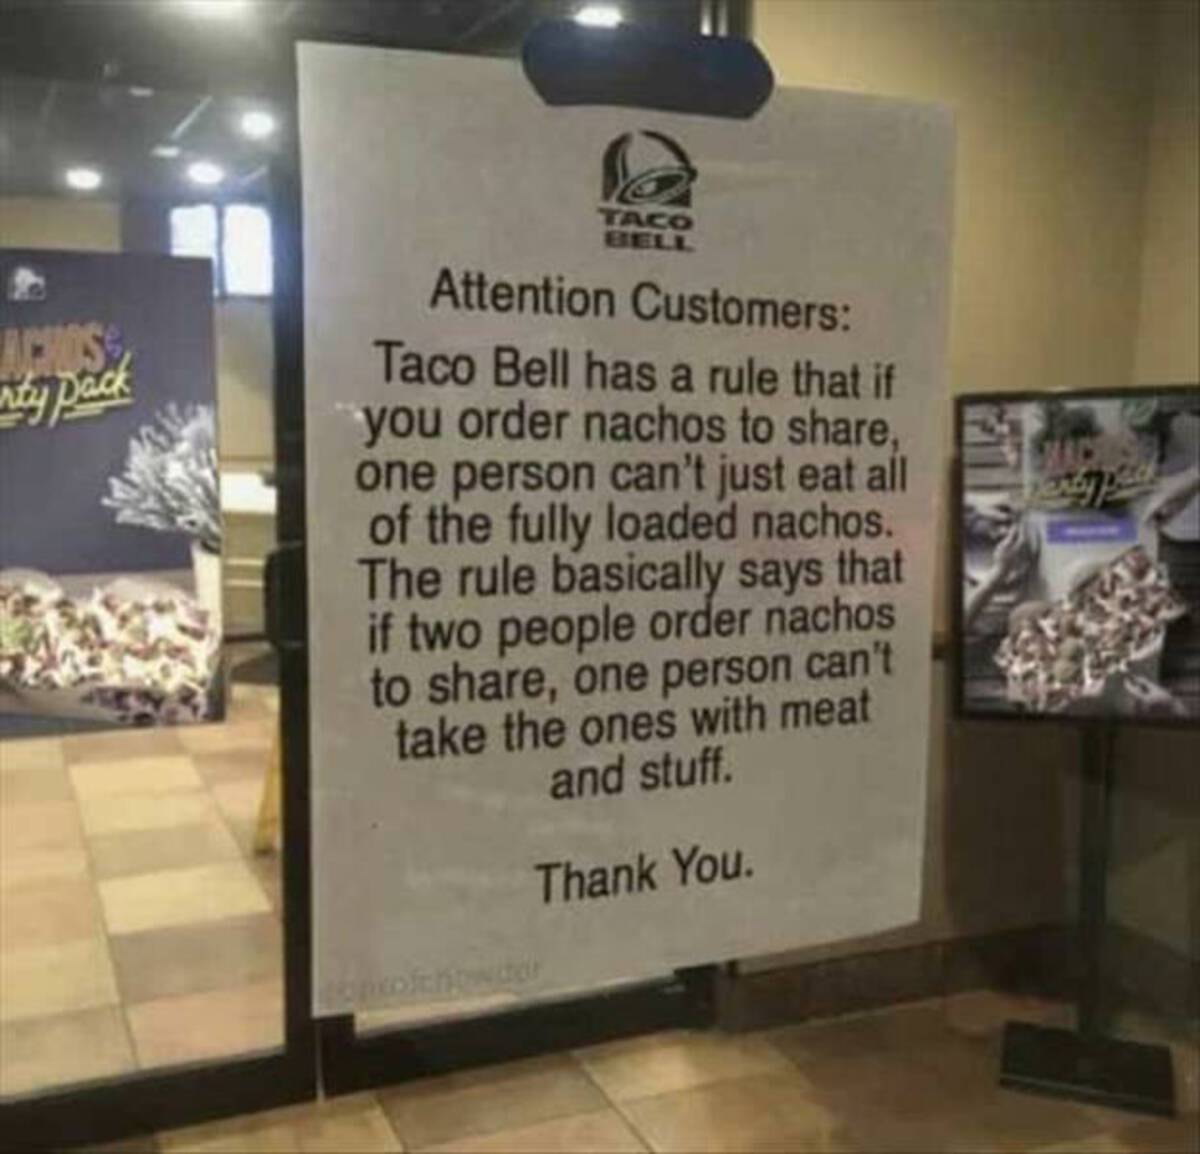 banner - Achos ty pack Taco Bell Attention Customers Taco Bell has a rule that if you order nachos to , one person can't just eat all of the fully loaded nachos. The rule basically says that if two people order nachos to , one person can't take the ones w